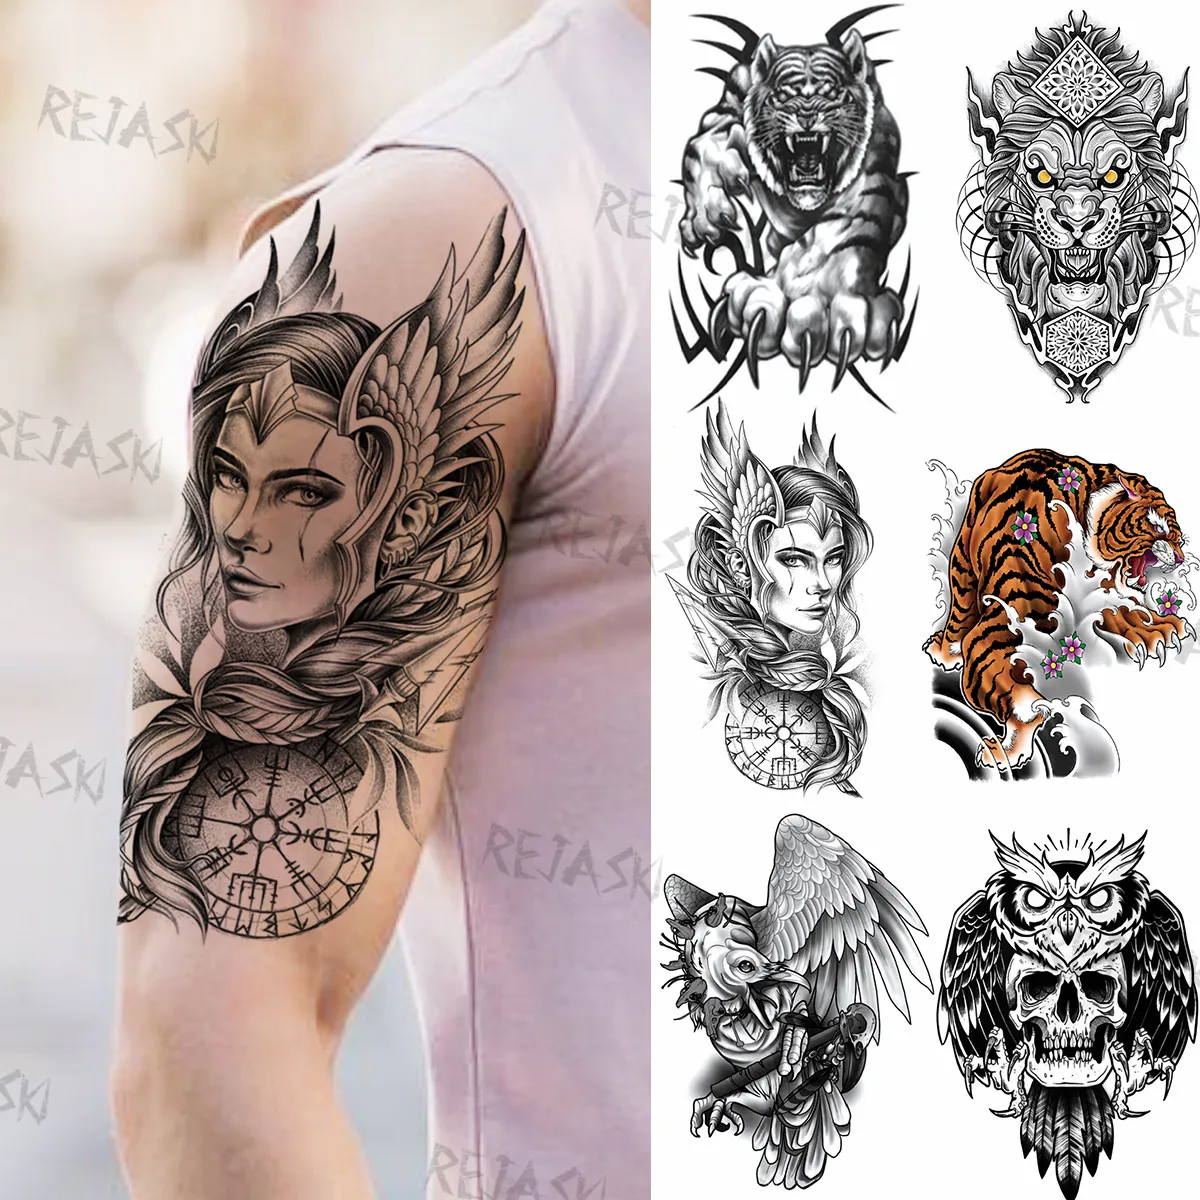 

Realistic Warrior Compass Temporary Tattoos For Men Women Fake Tiger Lion Eagle Owl Skull Tatoos Water Transfer Tattoo Stickers